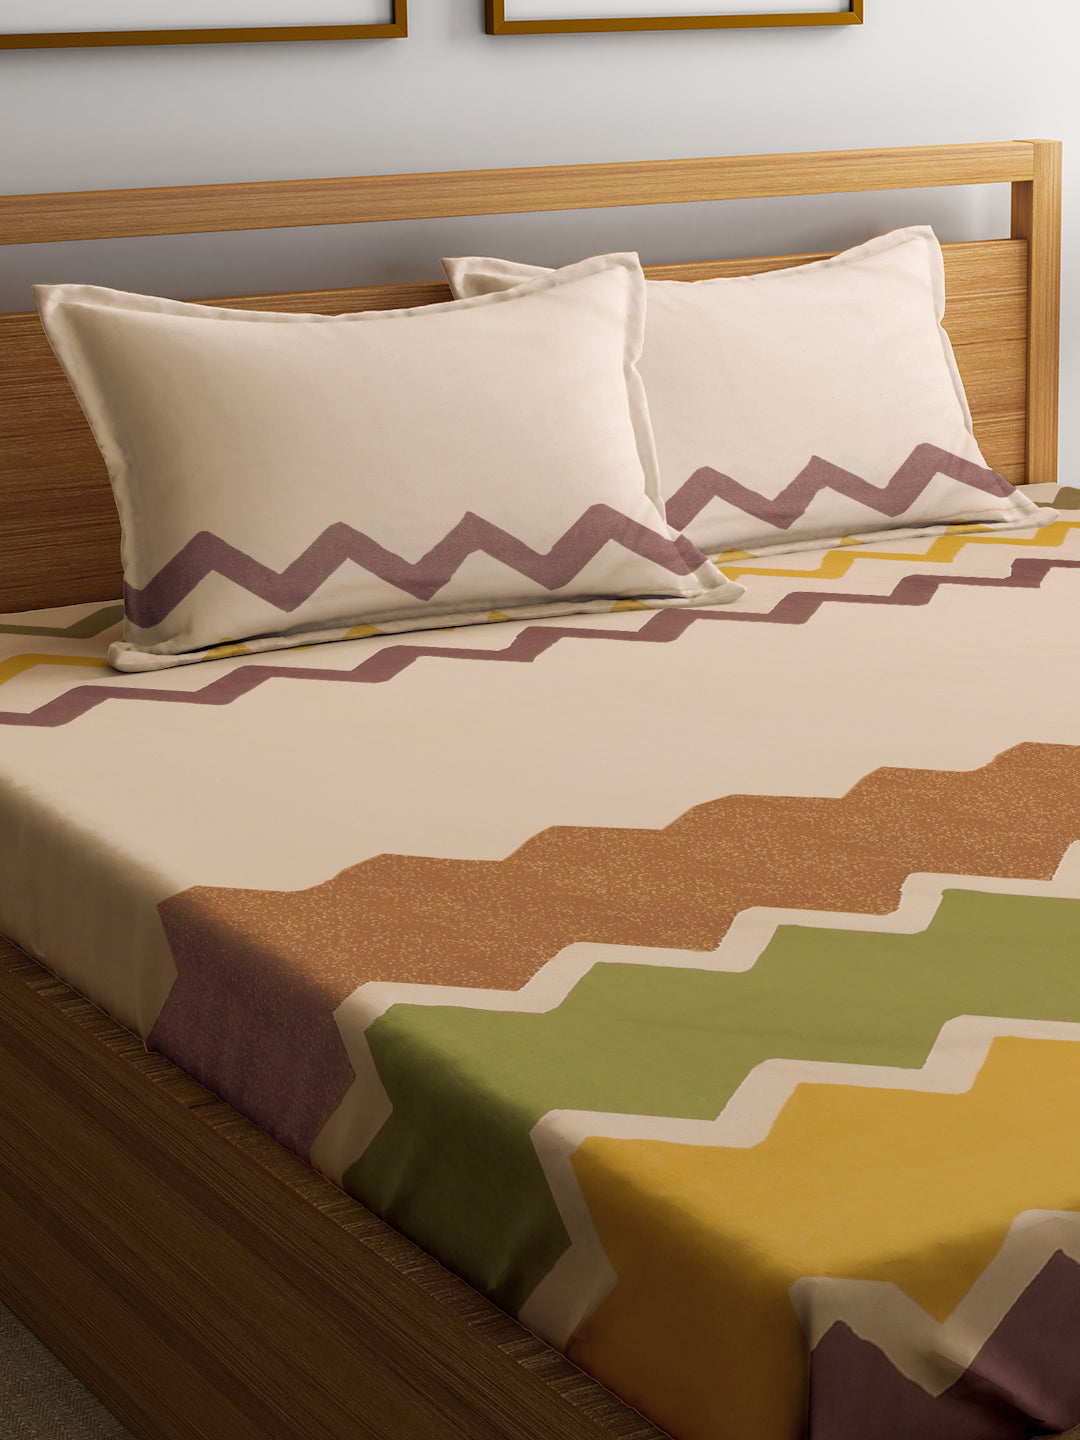 Klotthe Multi Abstract 300 TC Cotton Blend Elasticated Double Bedsheet Set in Book Fold Packing